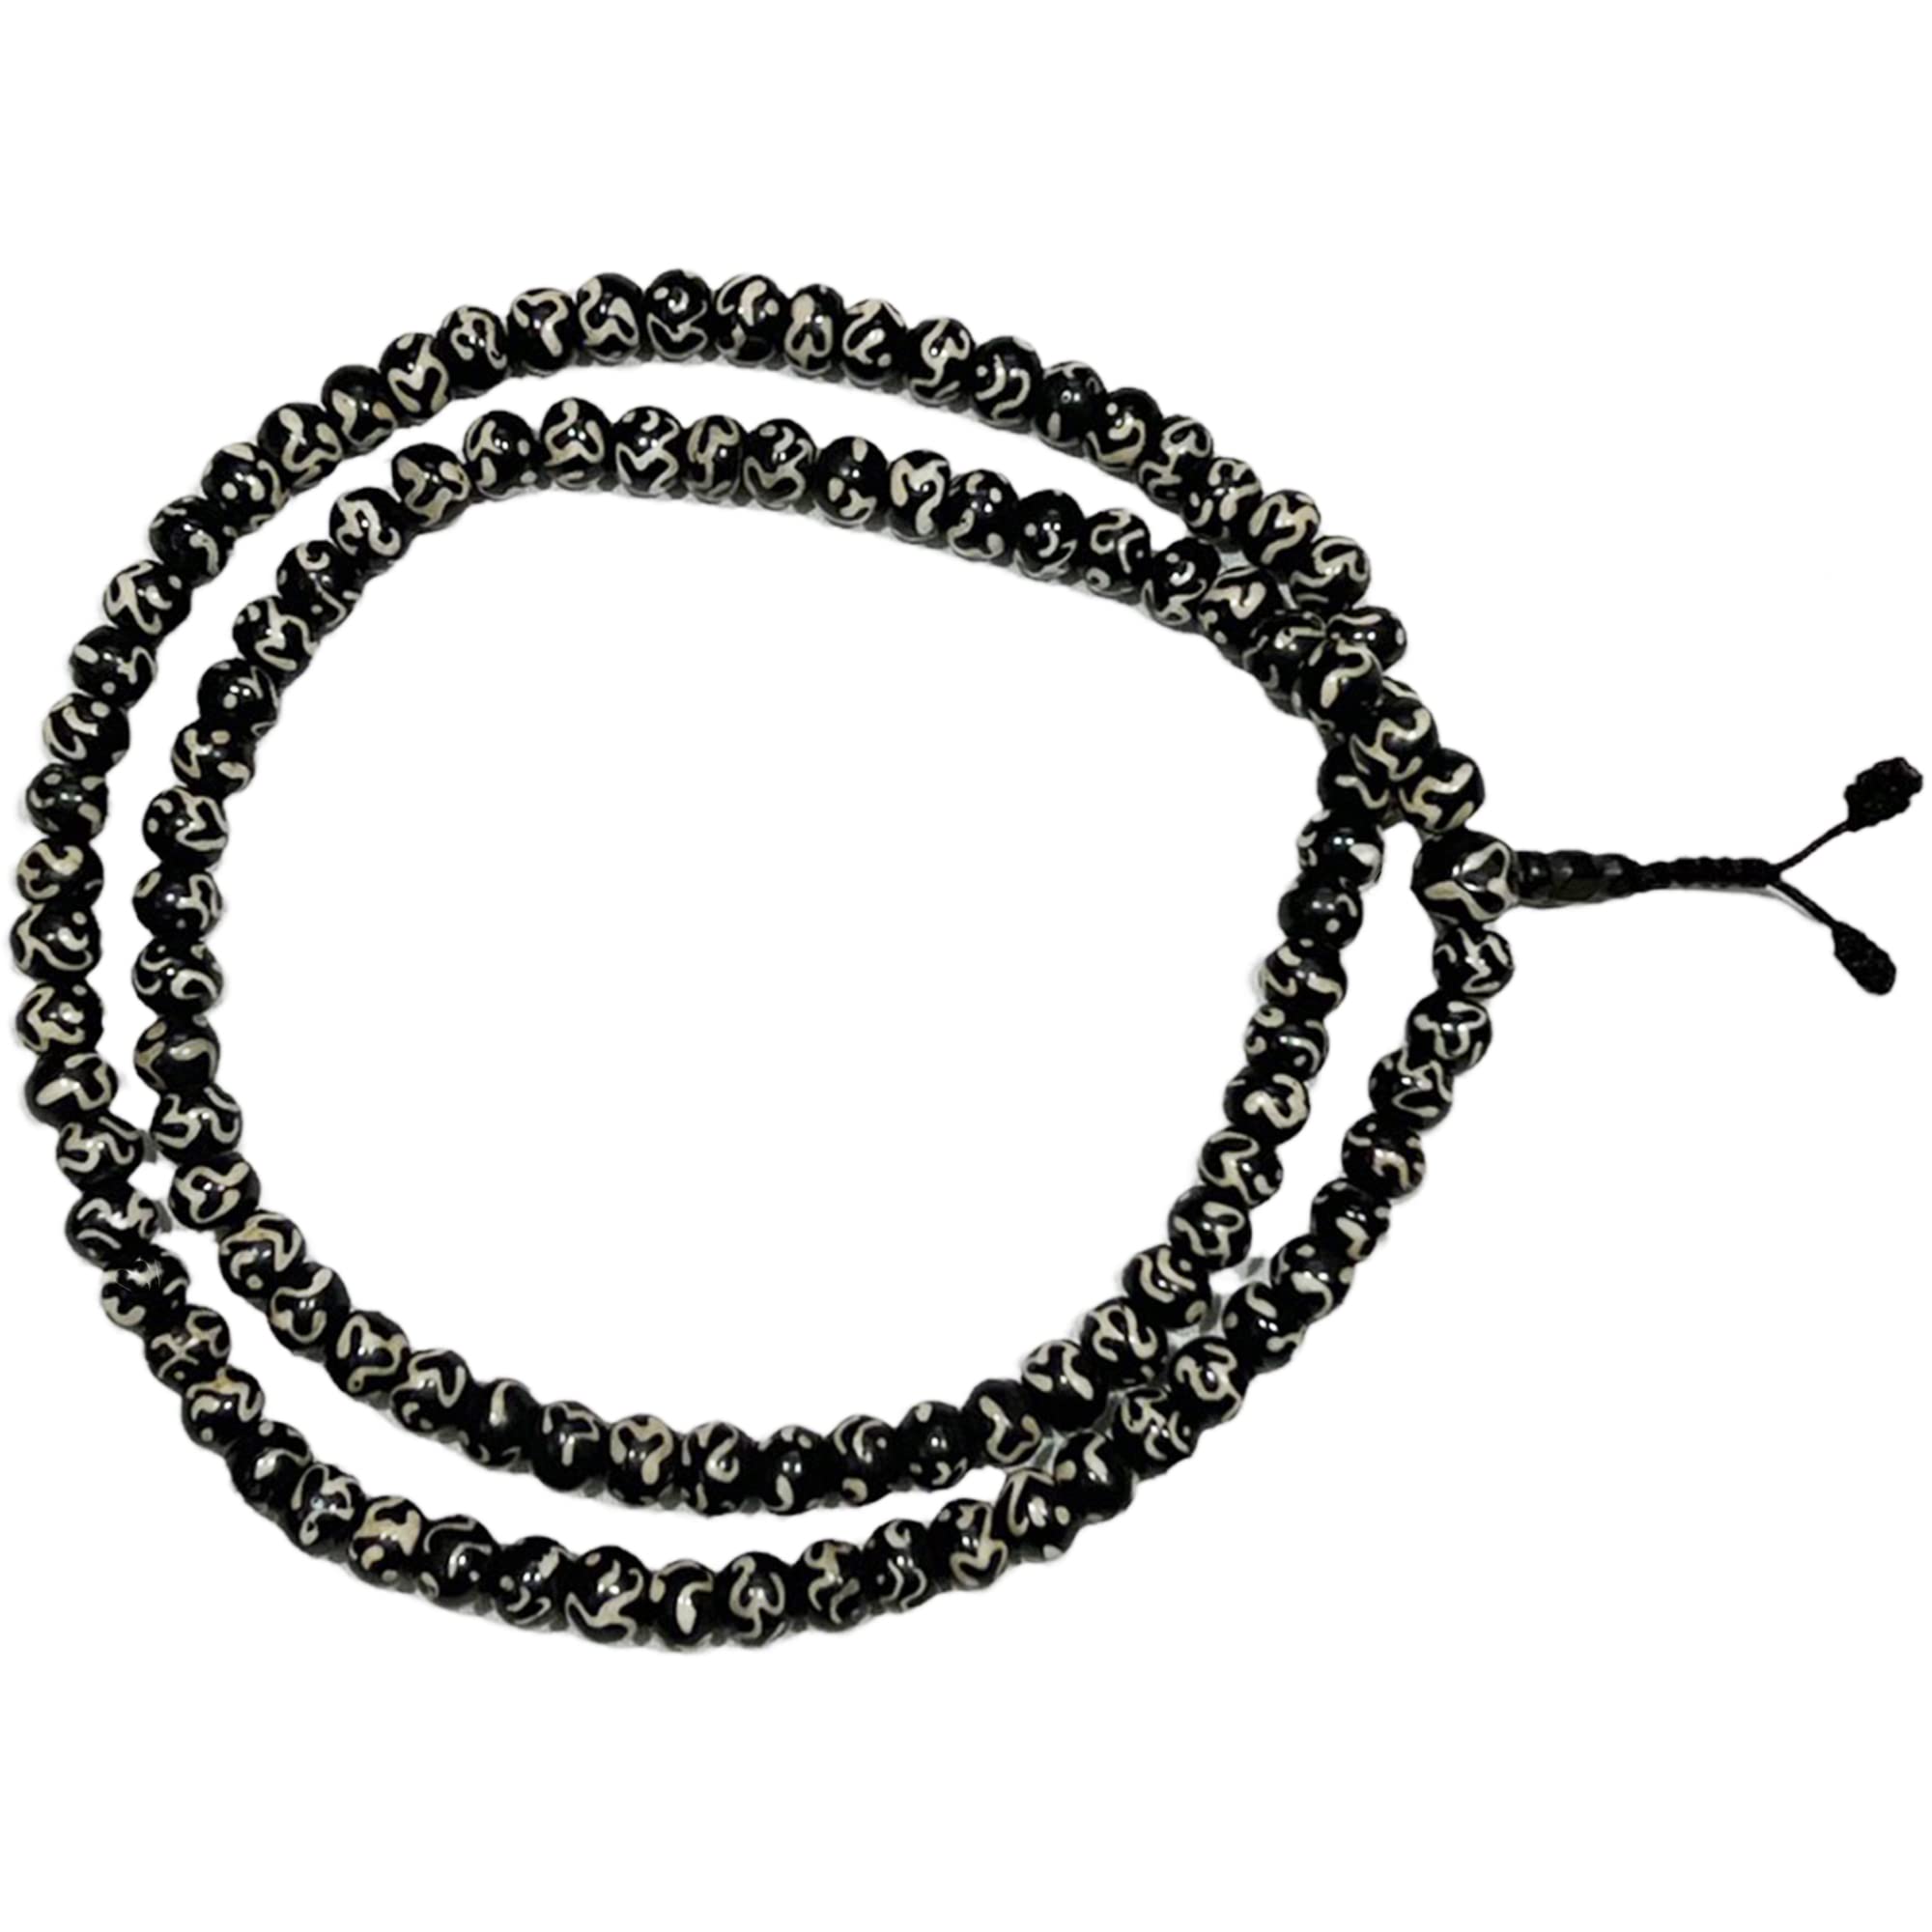 Genuine 108 Monk Beads Necklace